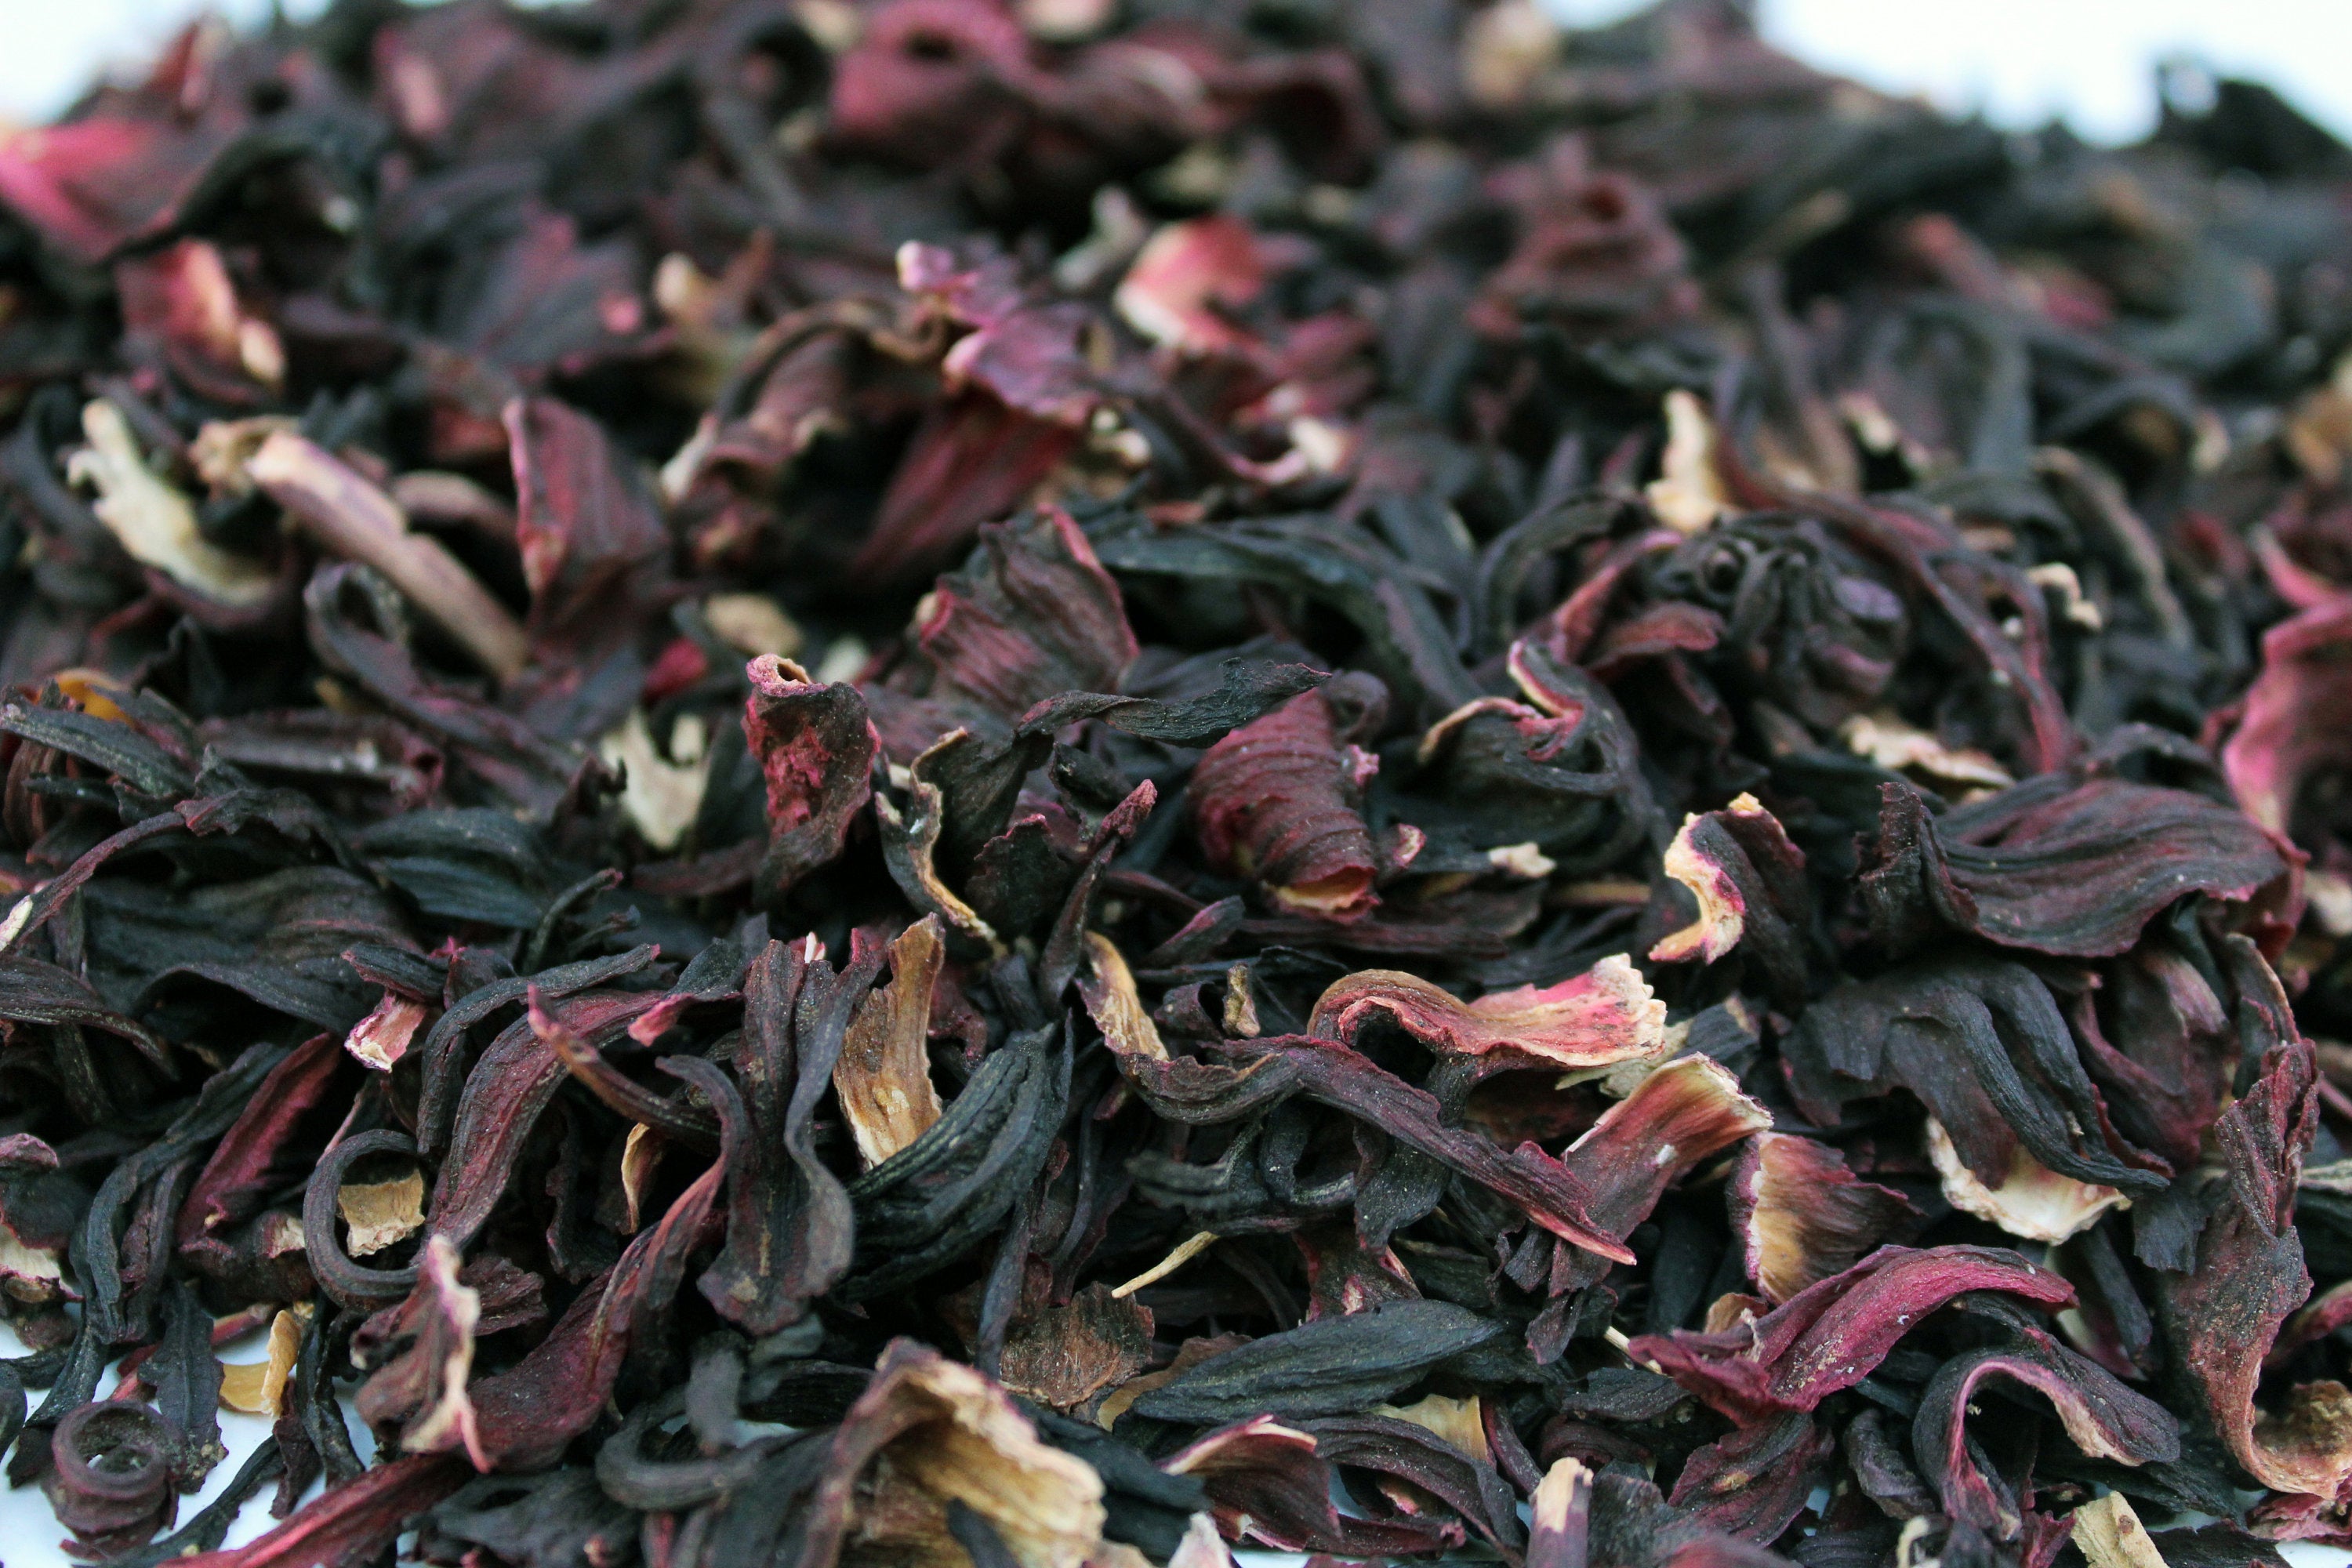 Hibiscus flowers, Dried, High Quality, Natural, Organic, Biodegraddable, Craft, Natural Organic OZ